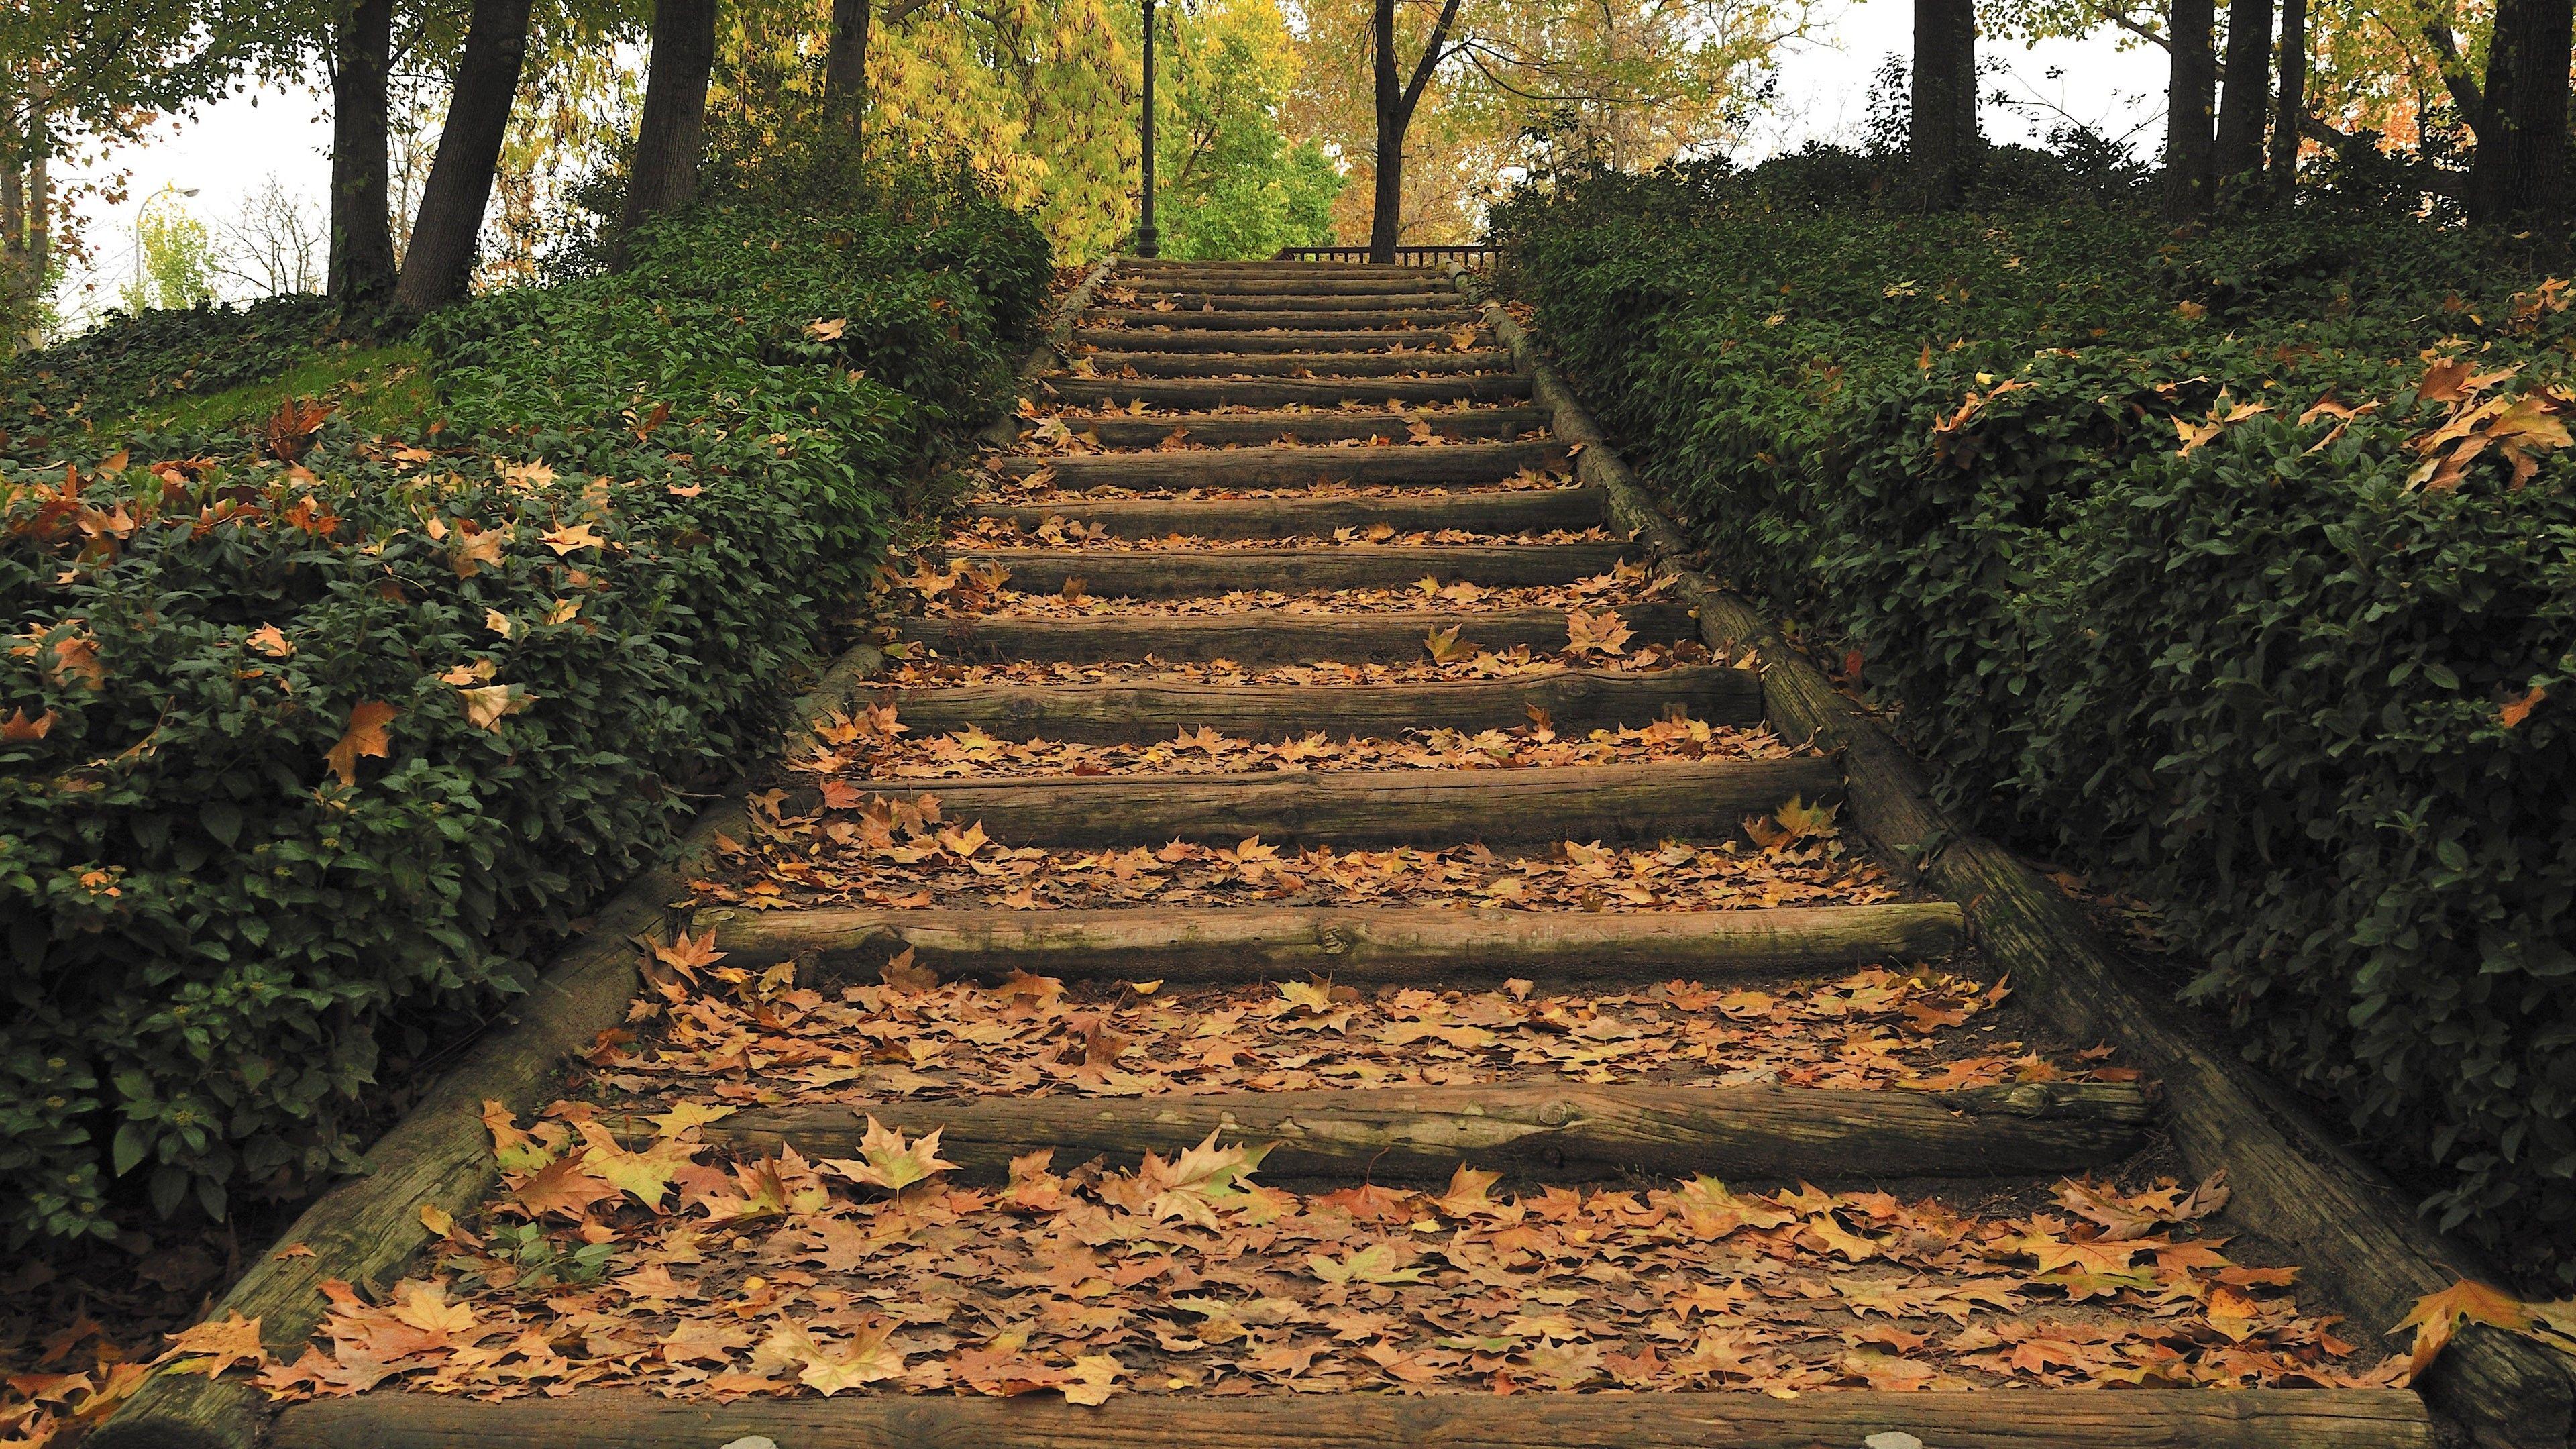 Photography: Wooden Stairs Leaf Tree Autumn Fall Stair 1080p